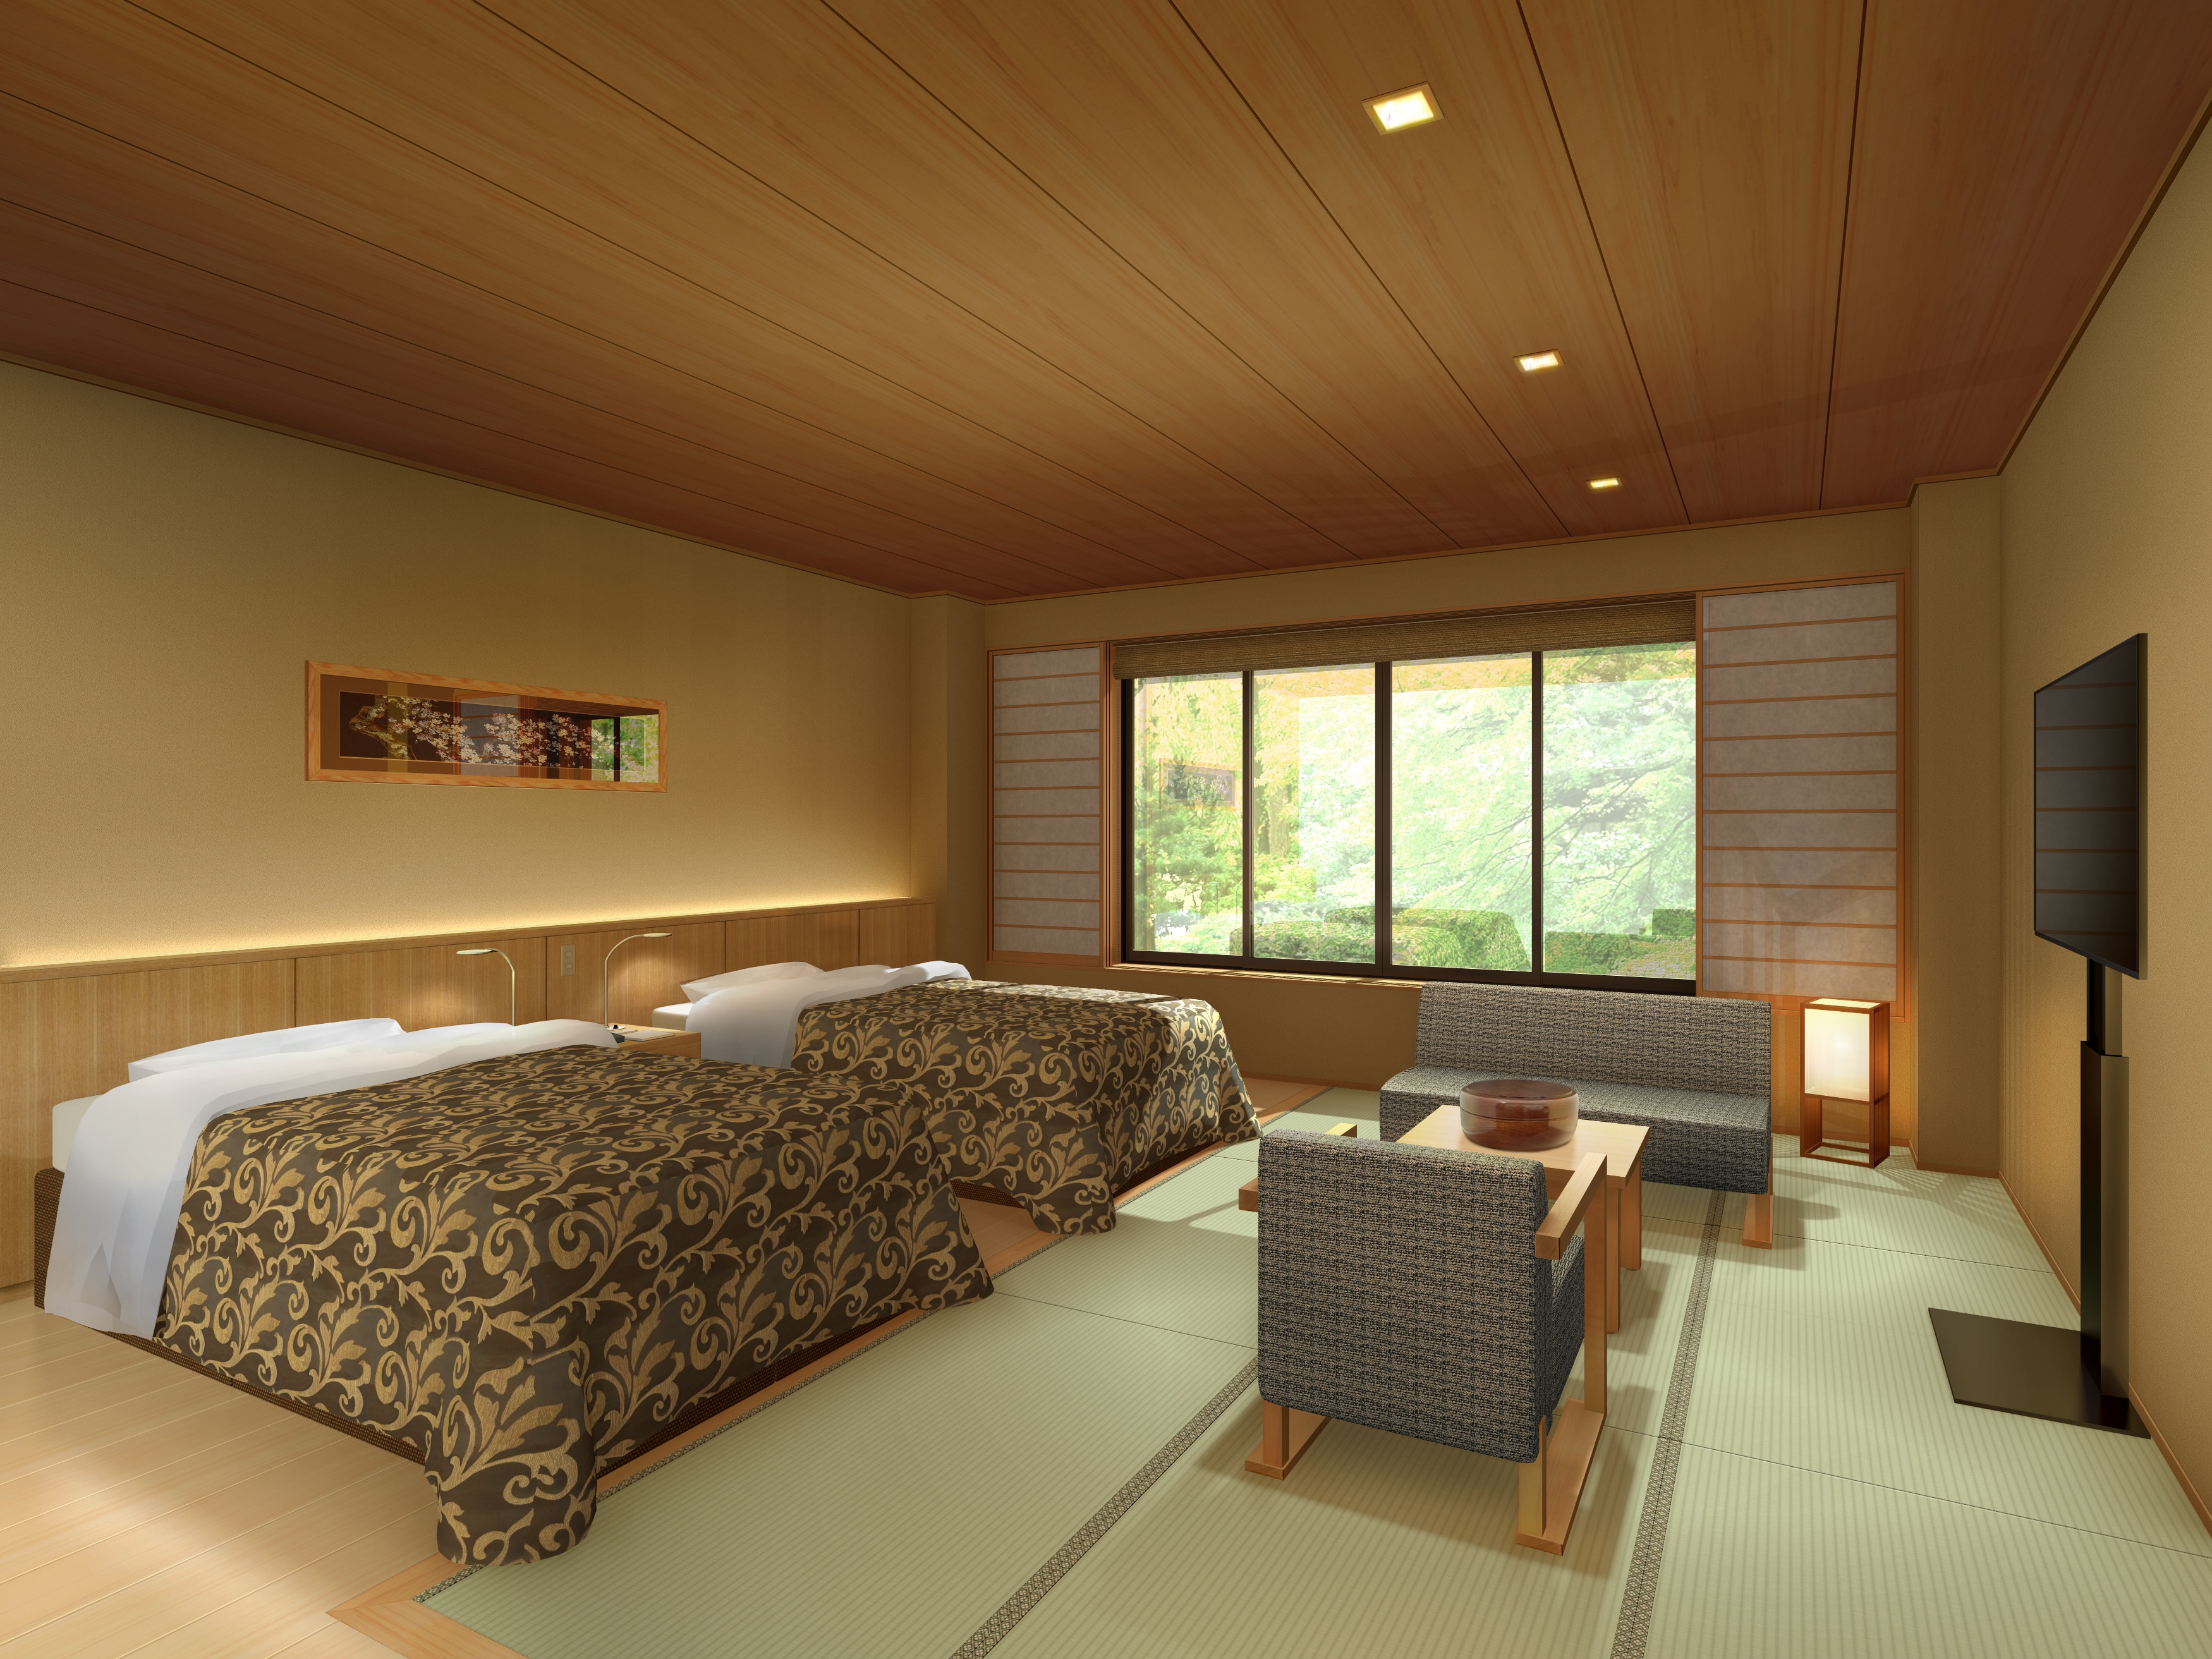 Semi-double bed Japanese-style modern guest room that can accommodate up to 3 people